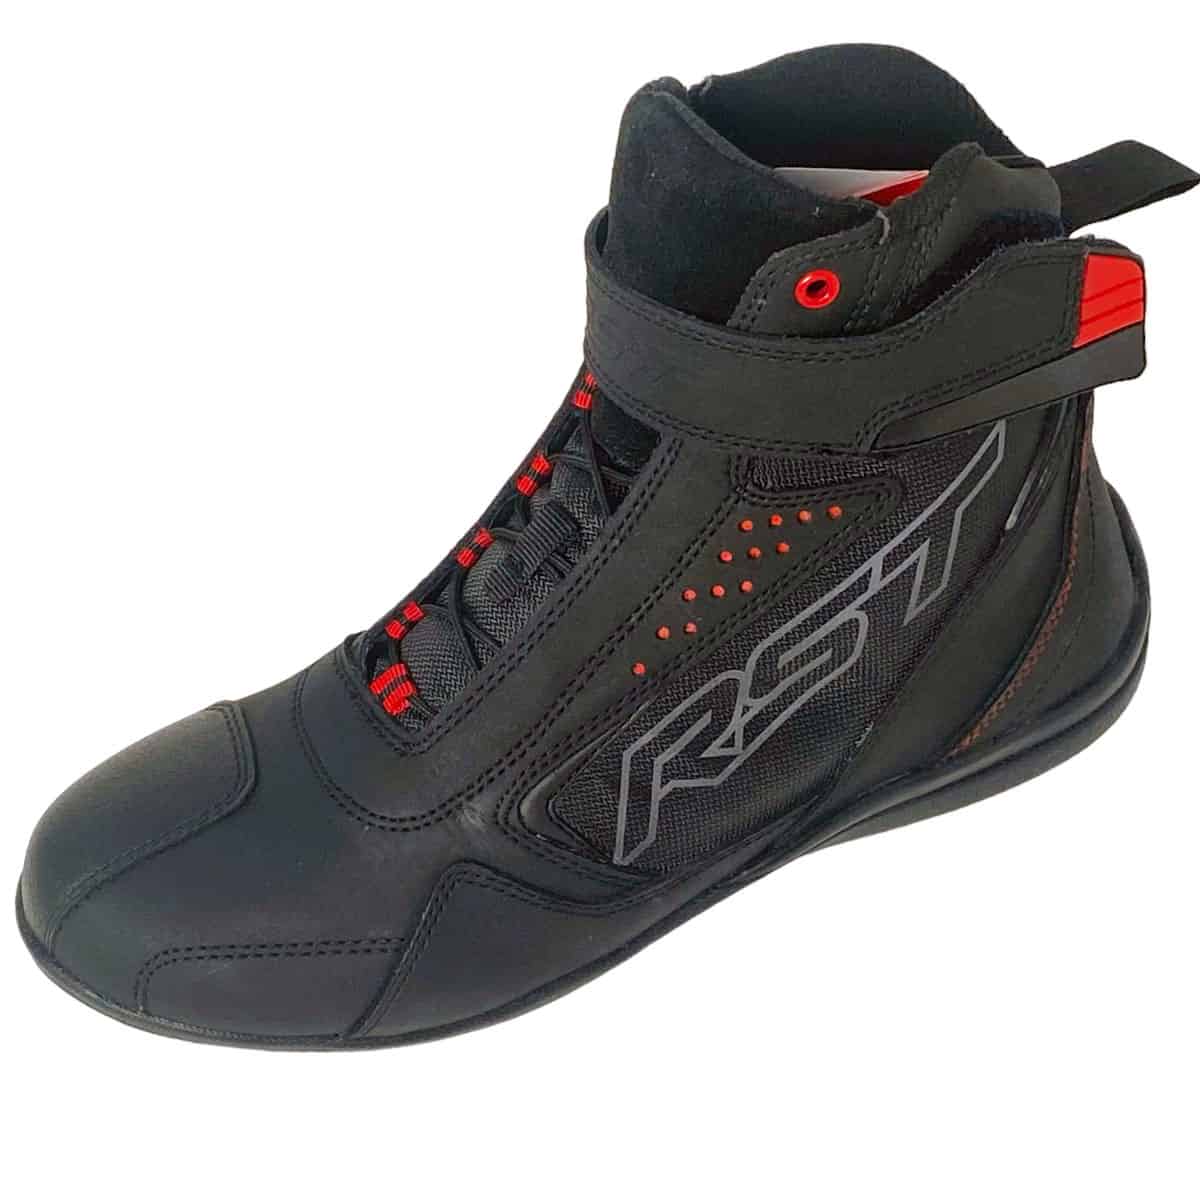 RST Frontier CE Boots: Breathable summer motorcycle boots - 3/4 view